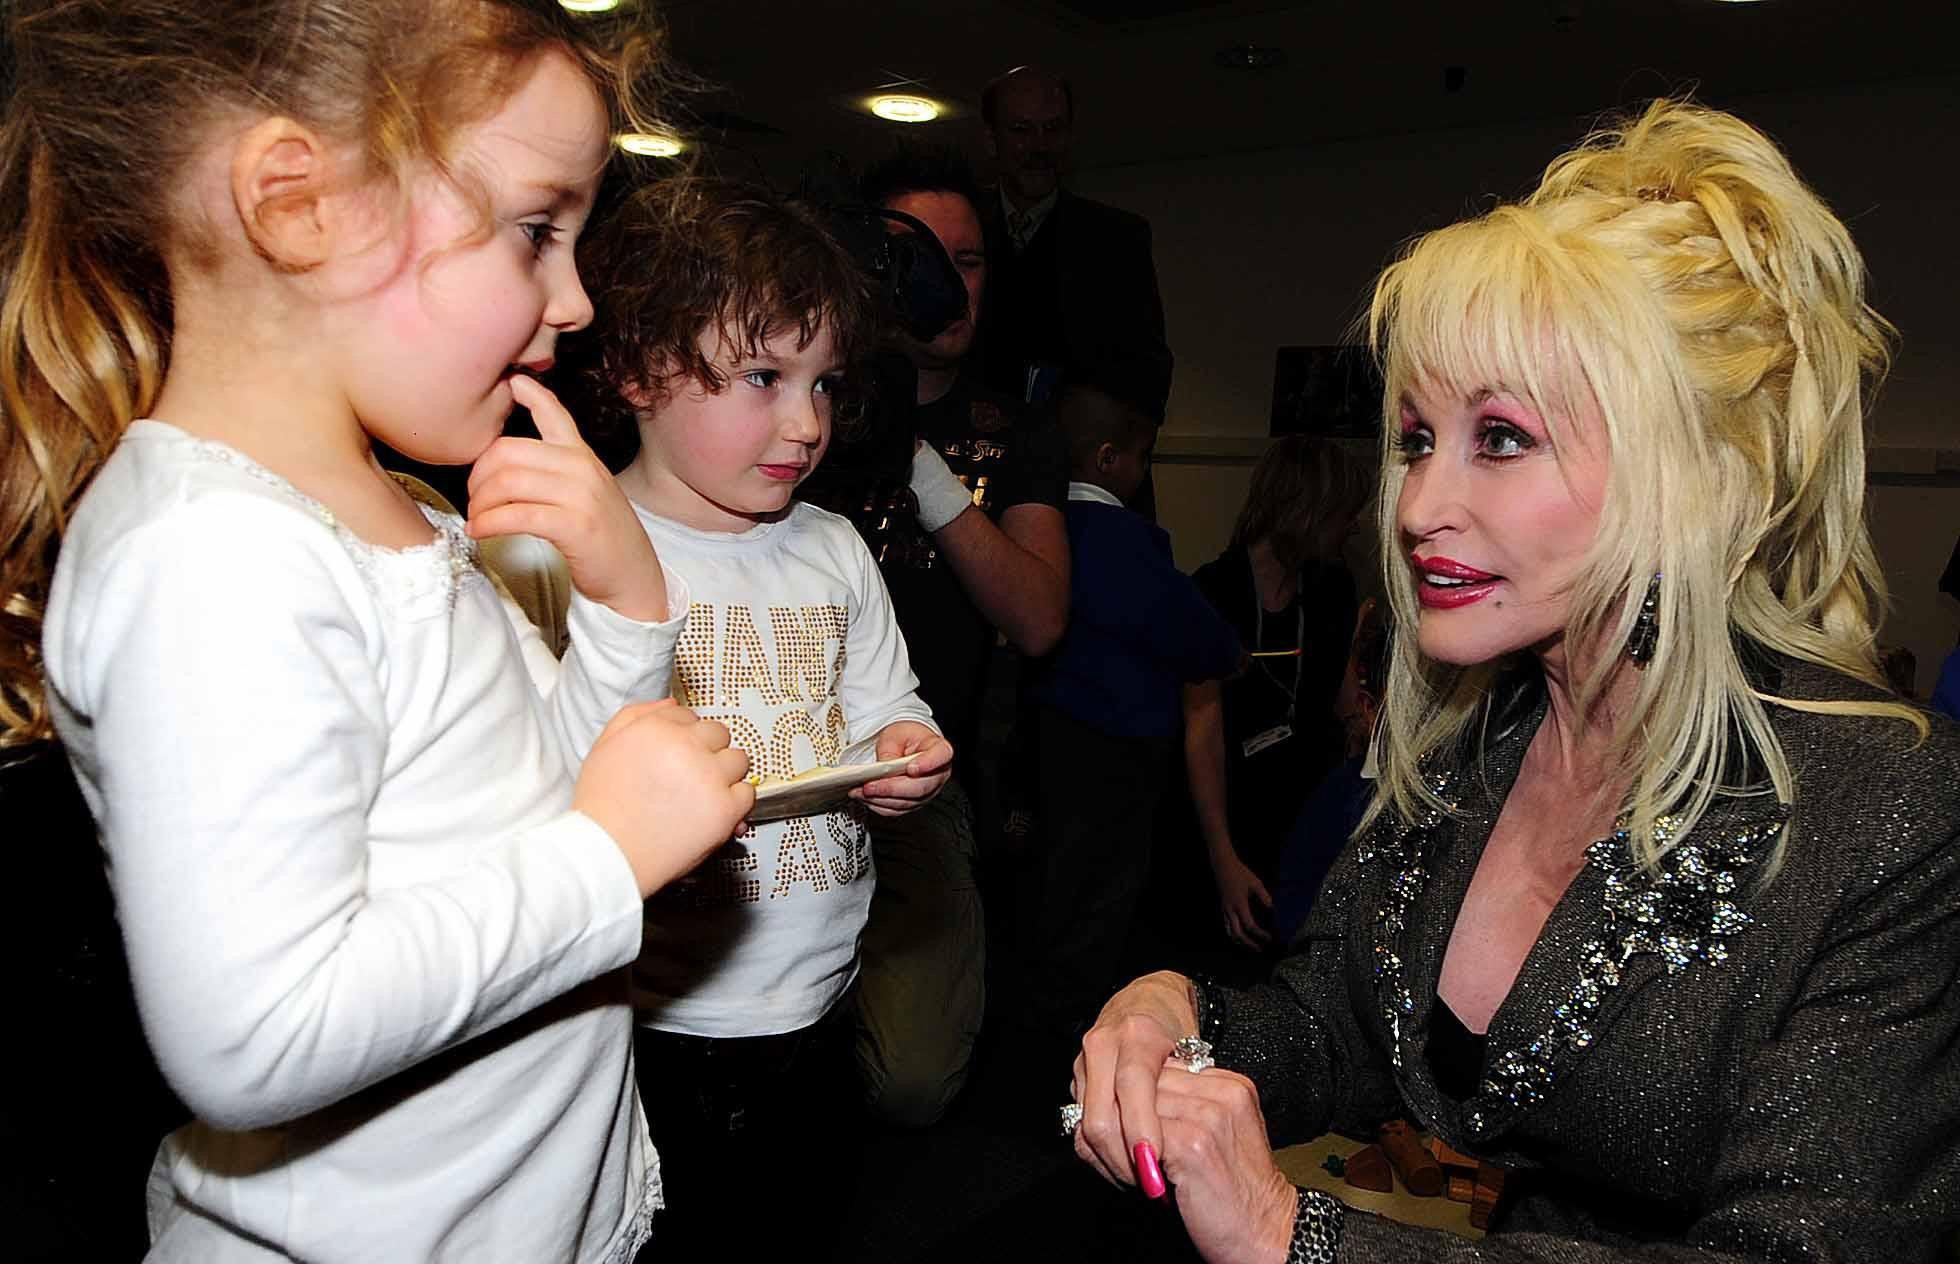 Dolly Parton launches the Imagination Library, her children's literacy scheme, at the Magna Science Adventure Centre in Rotherham, South Yorkshire, on December 5, 2007. | Source: Getty Images